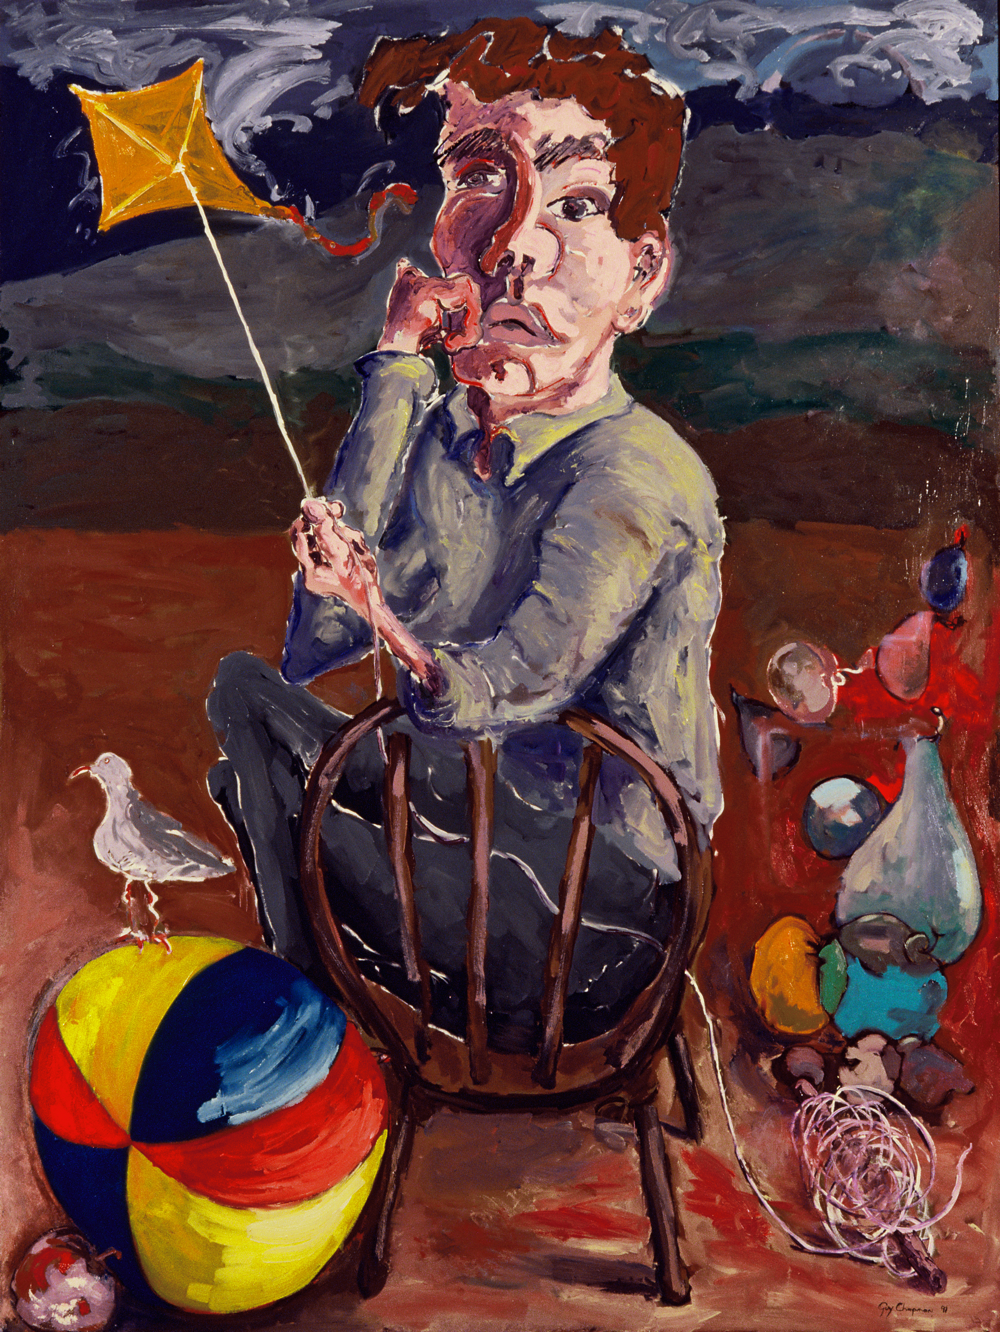 Kite oil painting of seated figure flying a kite